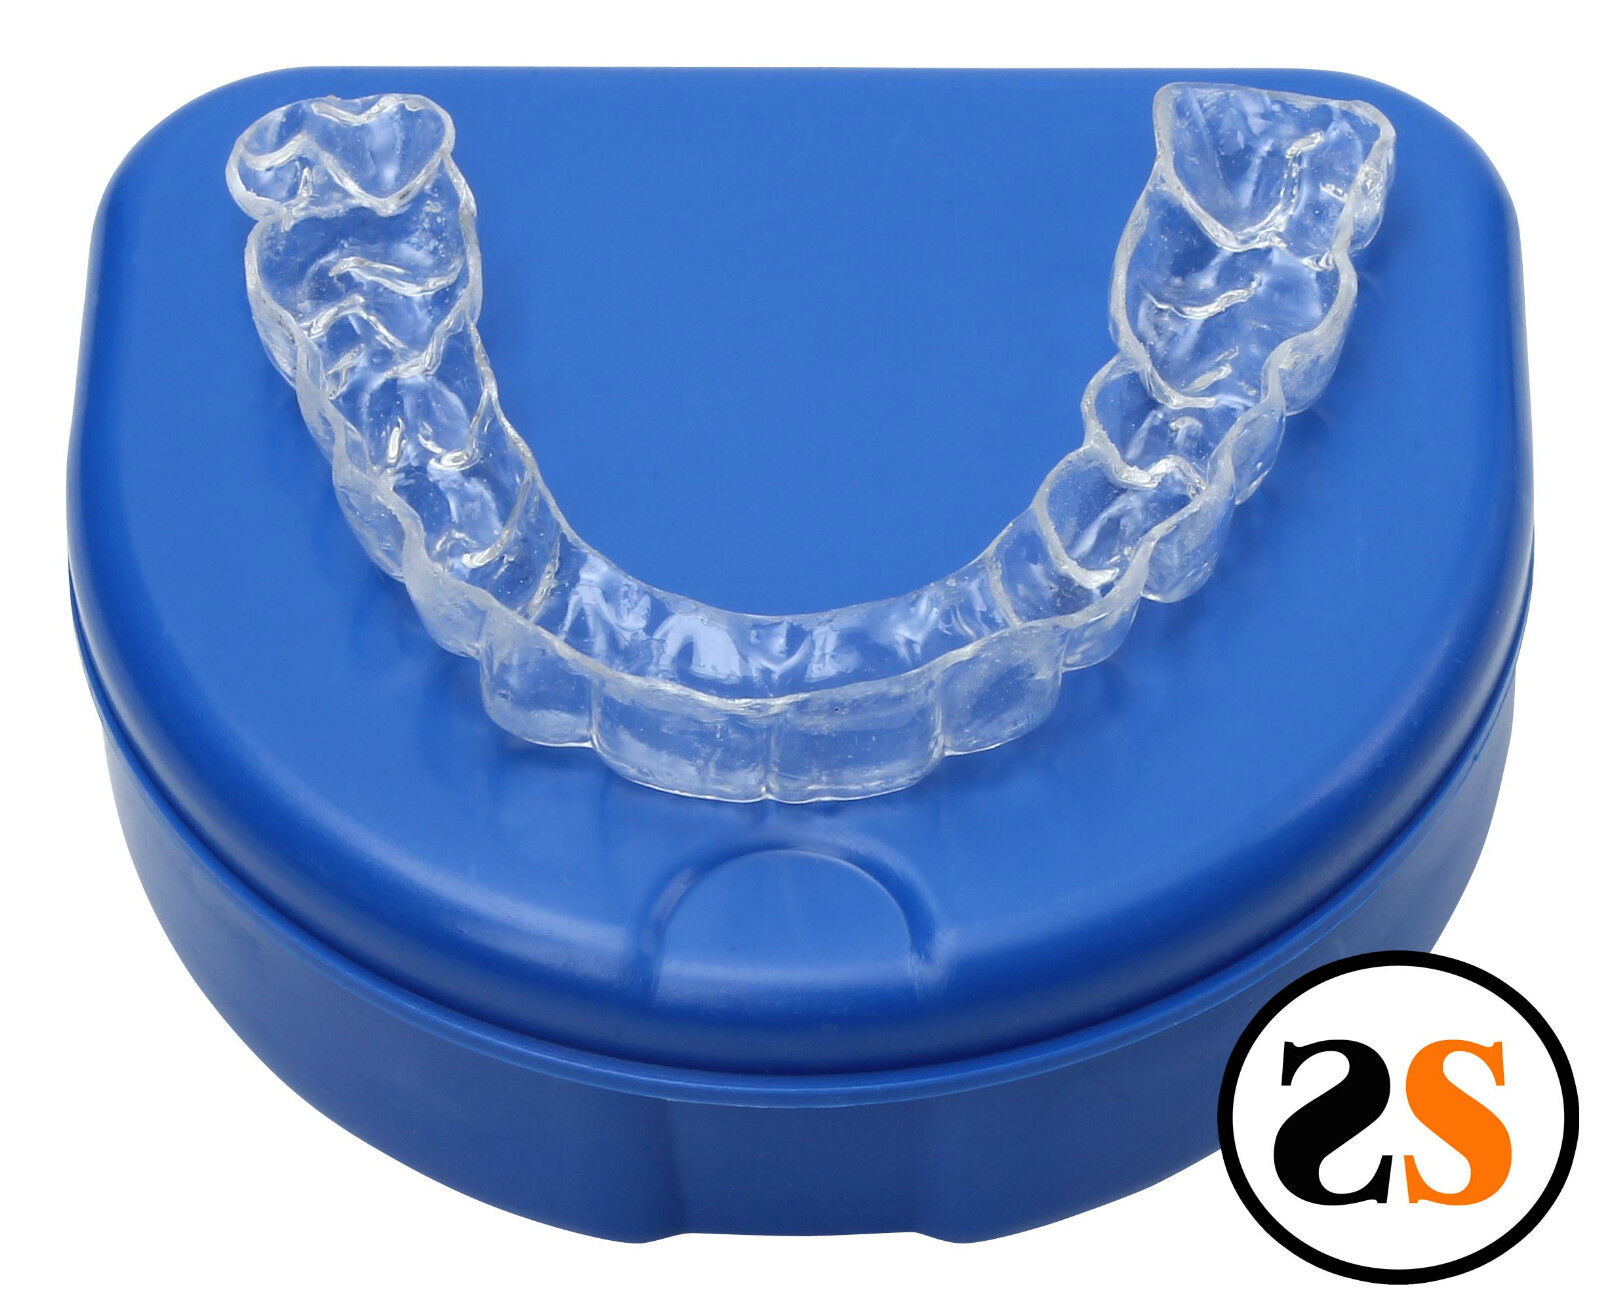 One Single Essix Replacement Professional Dental Orthondontic Retainer 